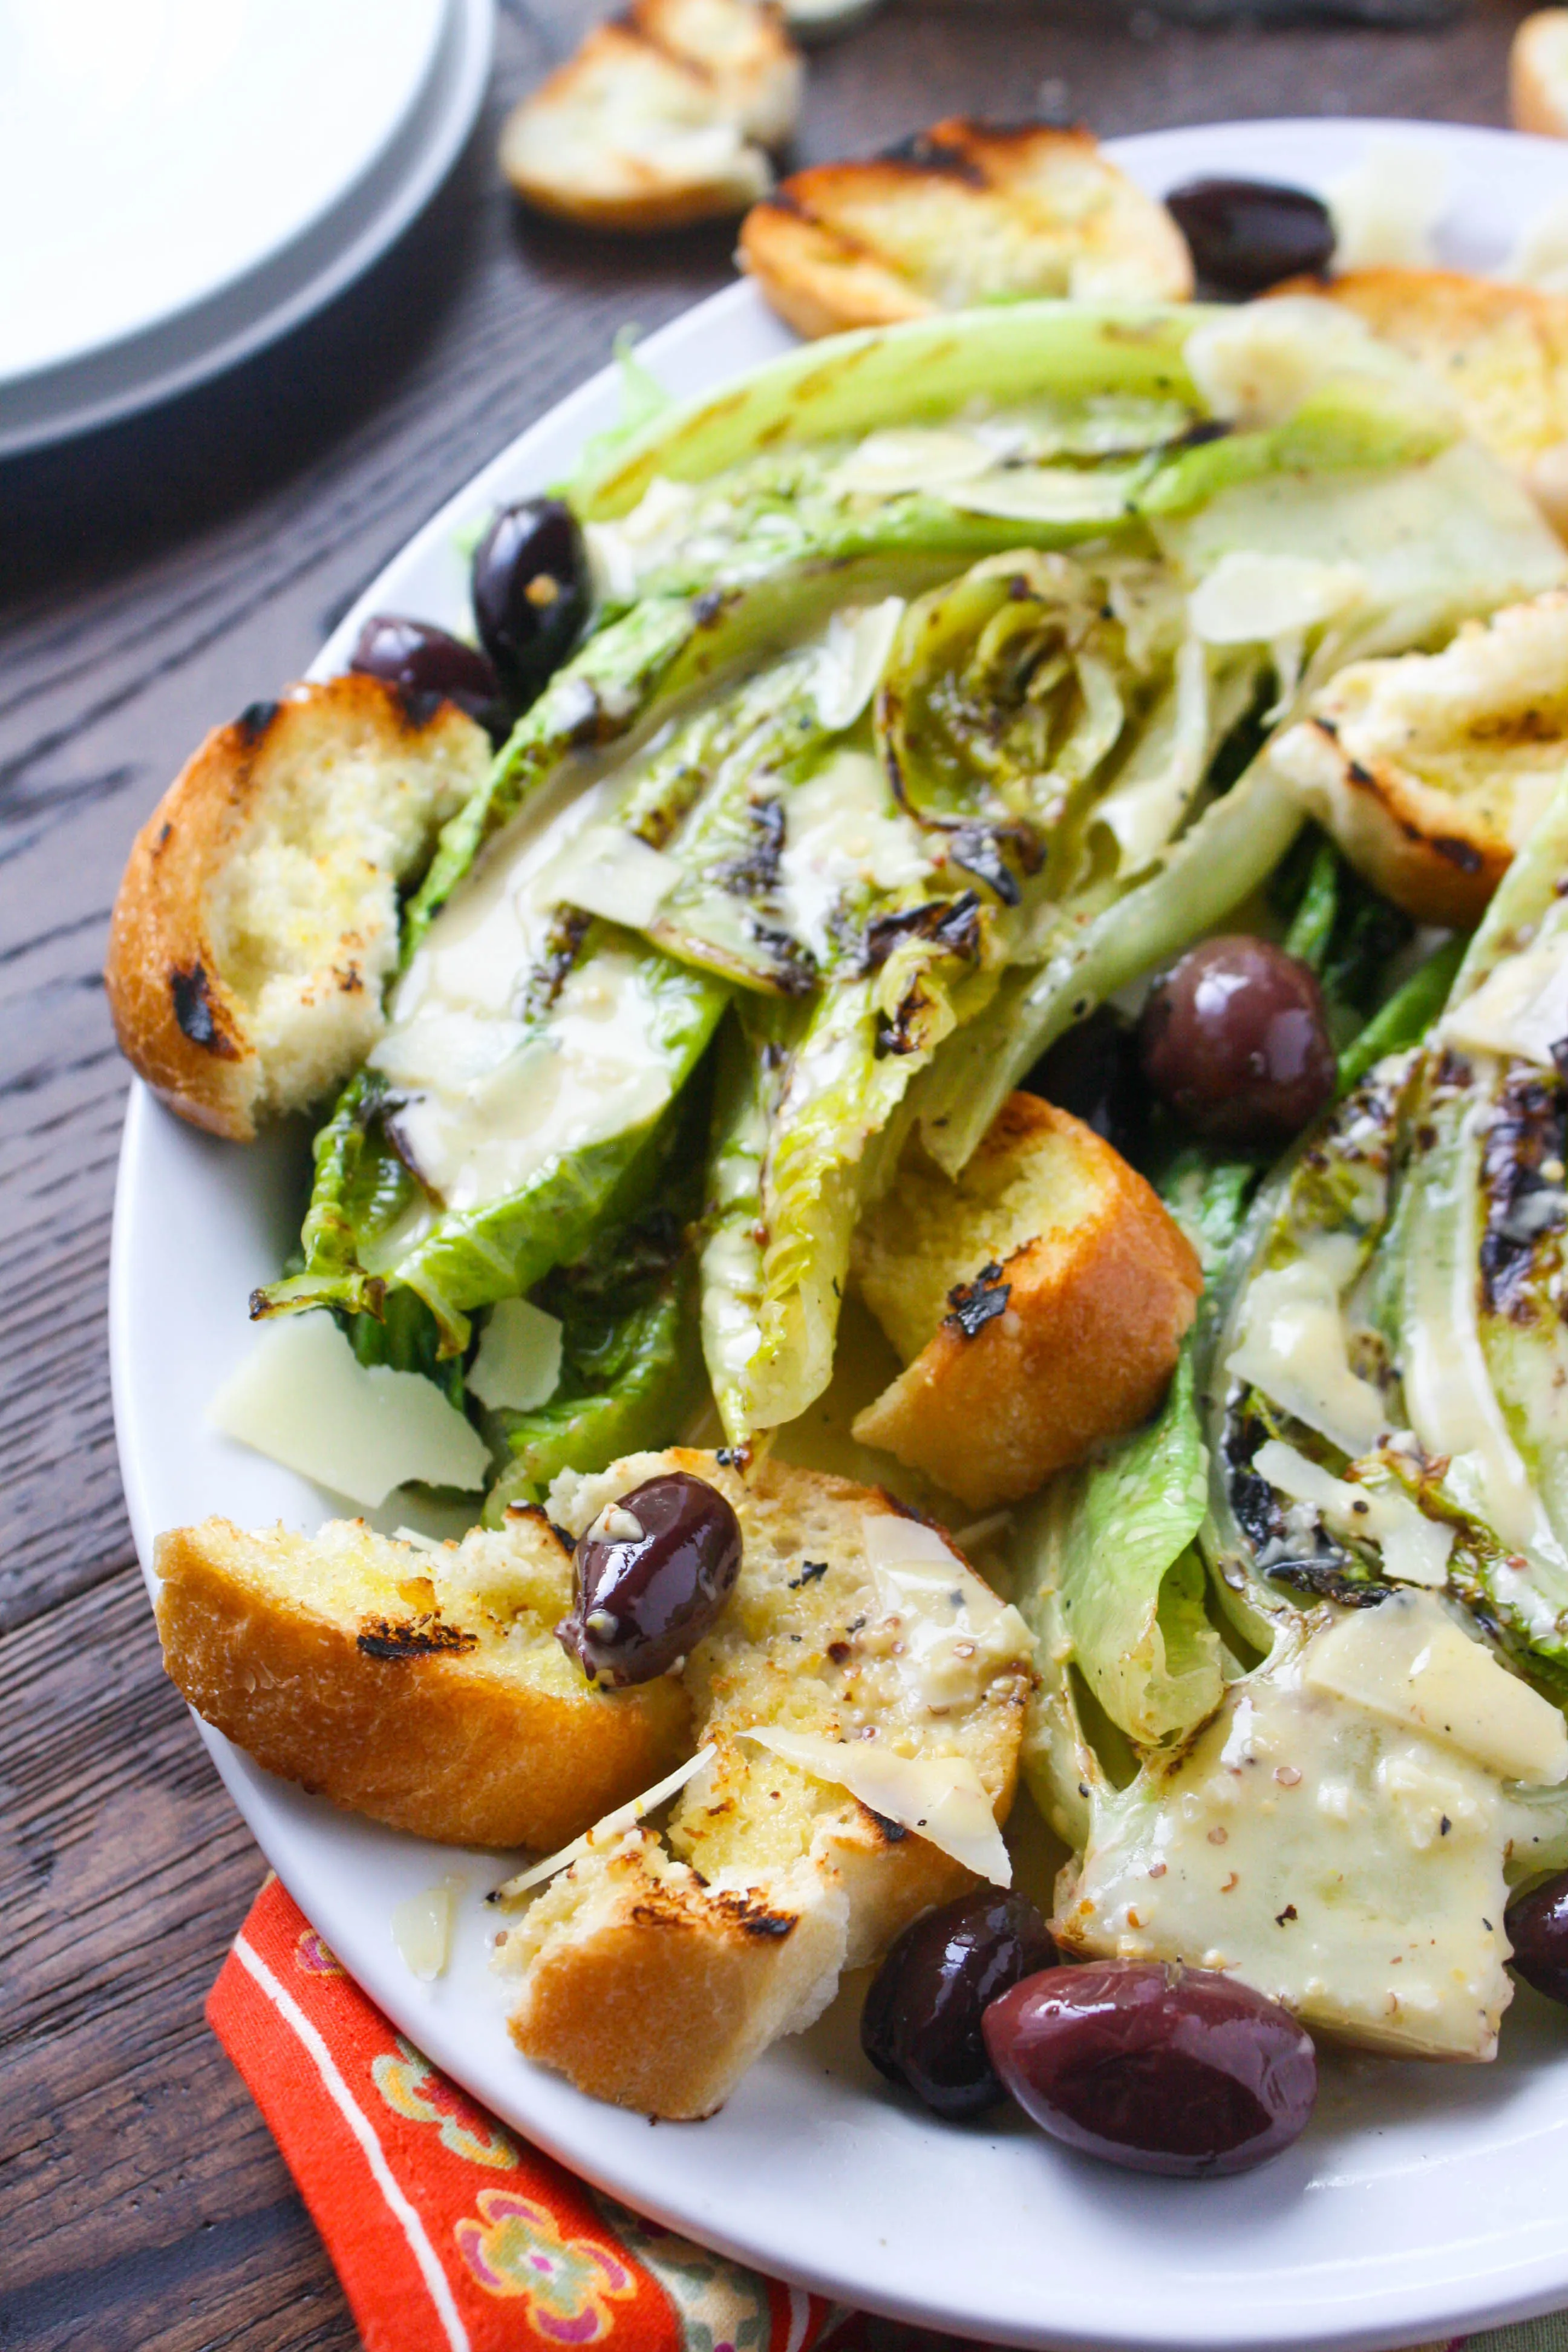 Grilled Romaine Salad with Caesar Dressing is a deliciously different salad you'll love. Make this any time of year!